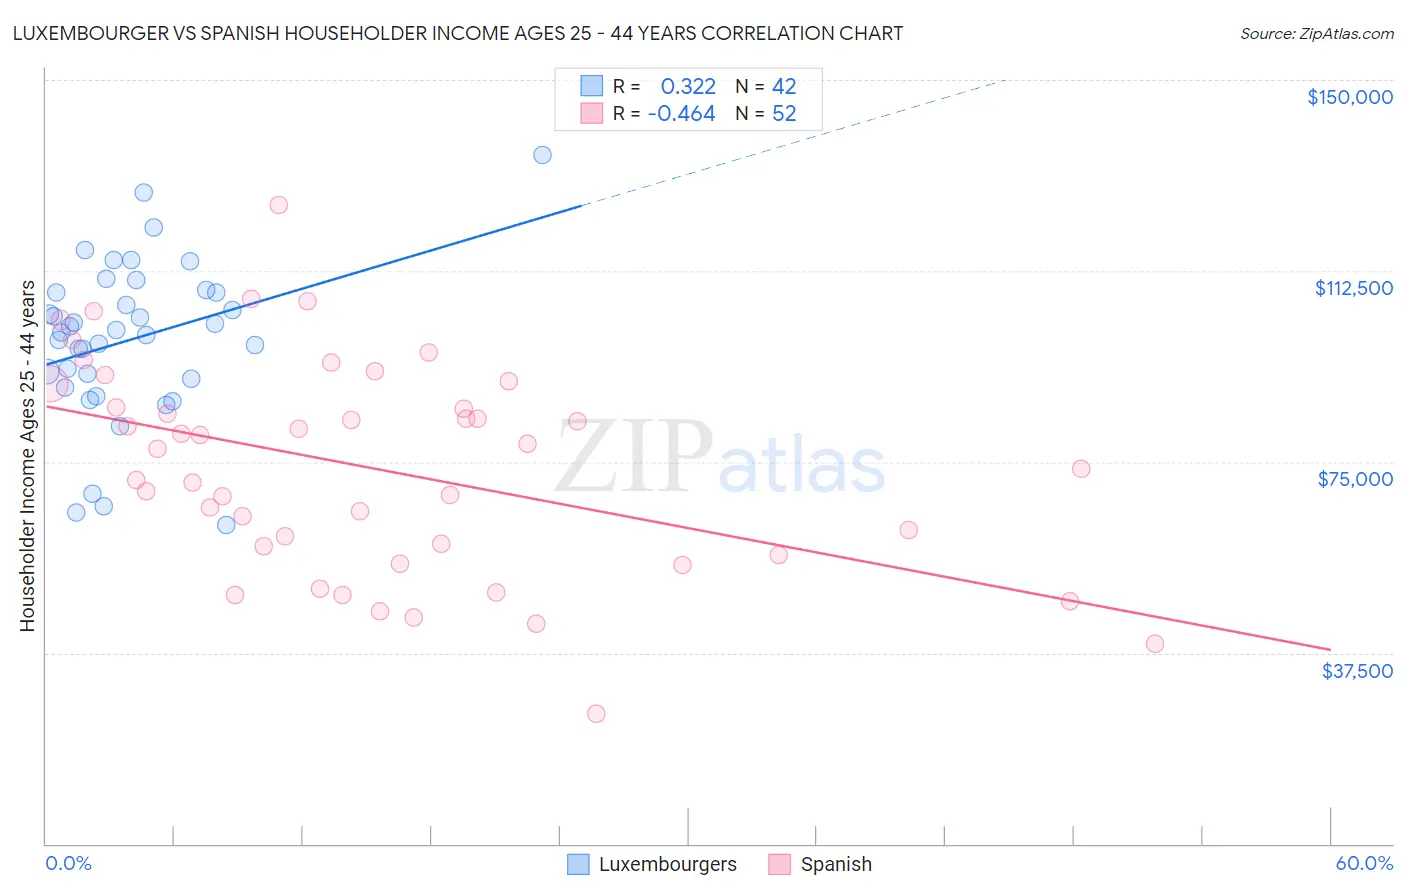 Luxembourger vs Spanish Householder Income Ages 25 - 44 years